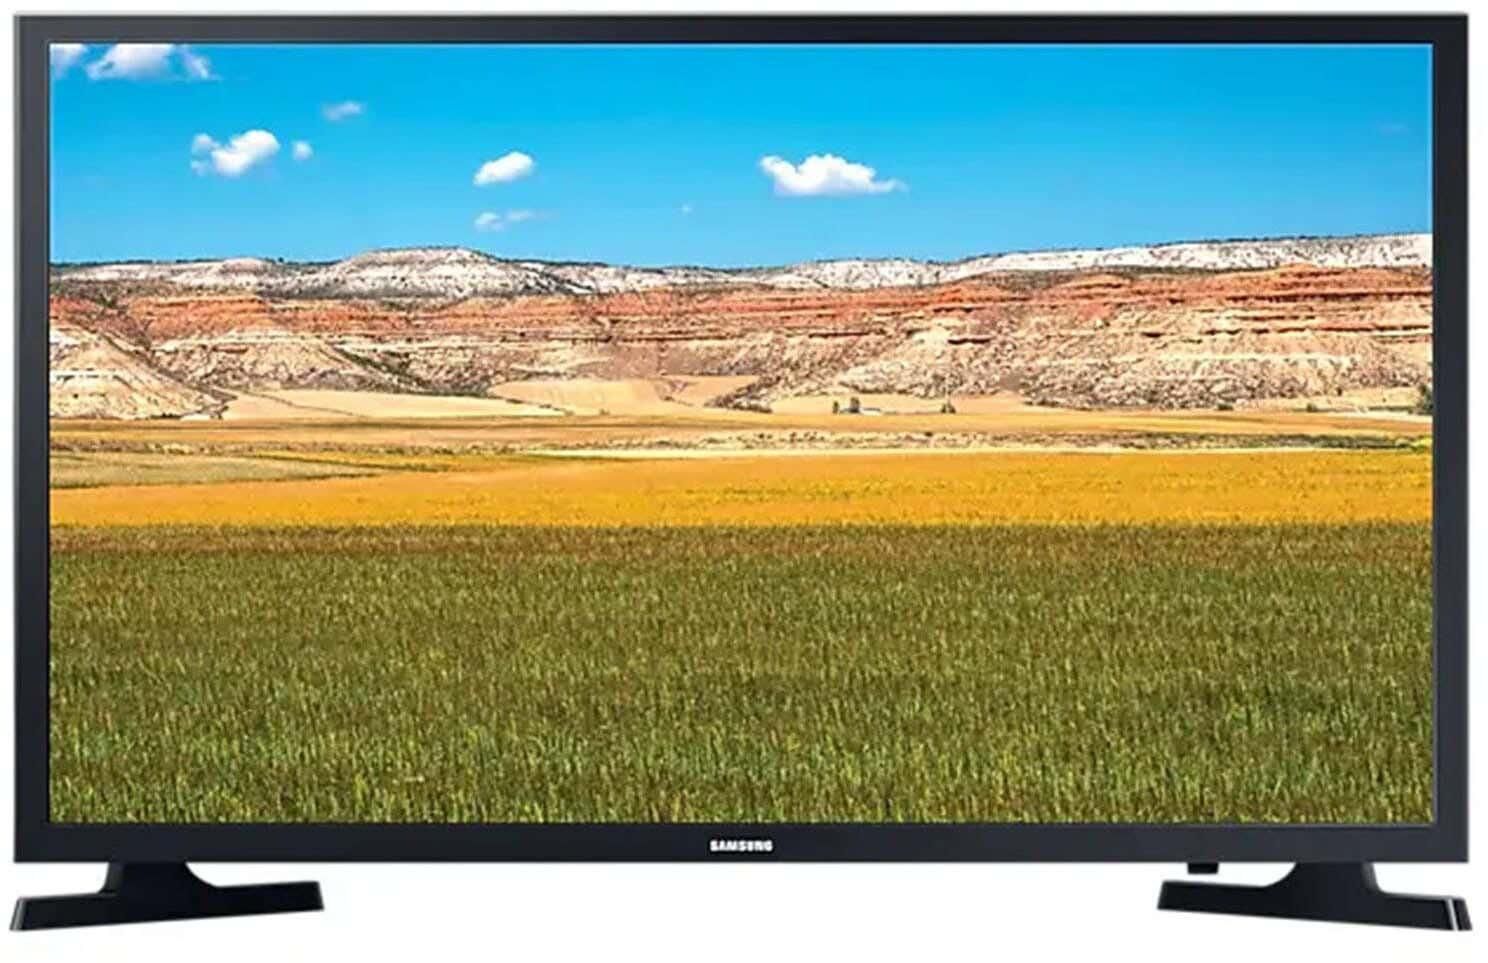 Get Samsung 32T5300 Smart TV With Built-in Receiver, 32 Inch, HD, LED - Black with best offers | Raneen.com